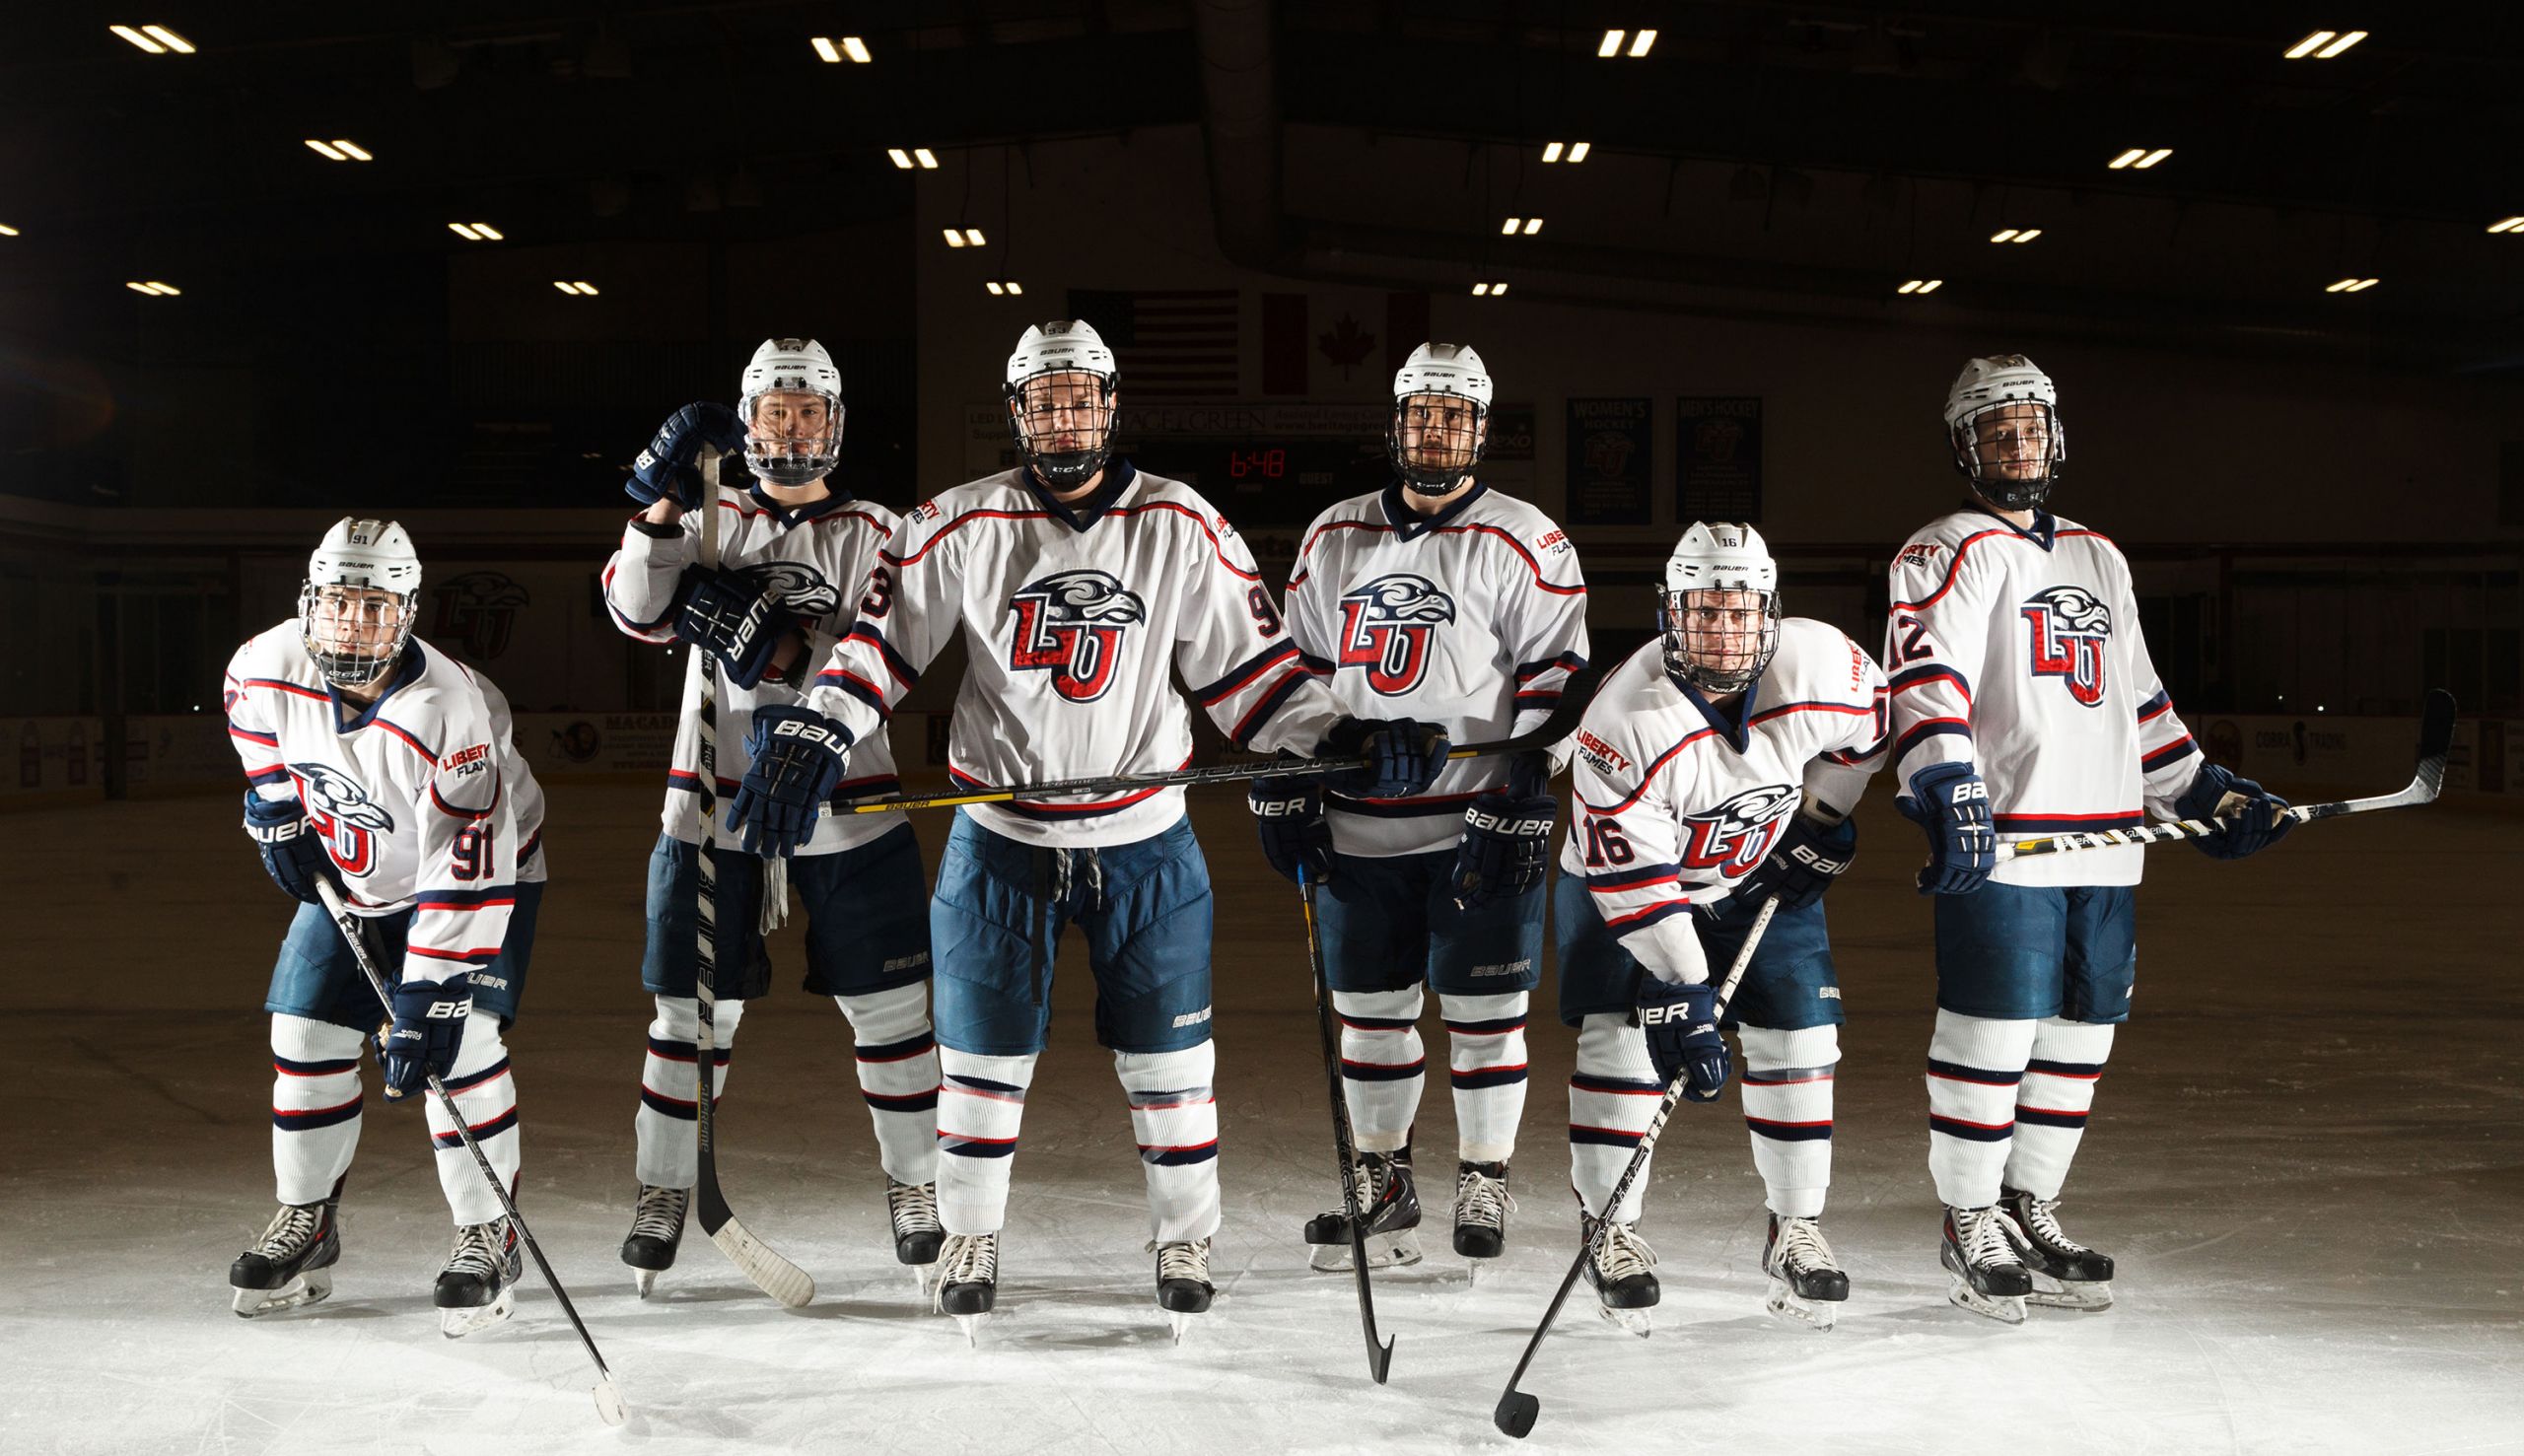 It was a record-setting year for Liberty University’s ice hockey teams.